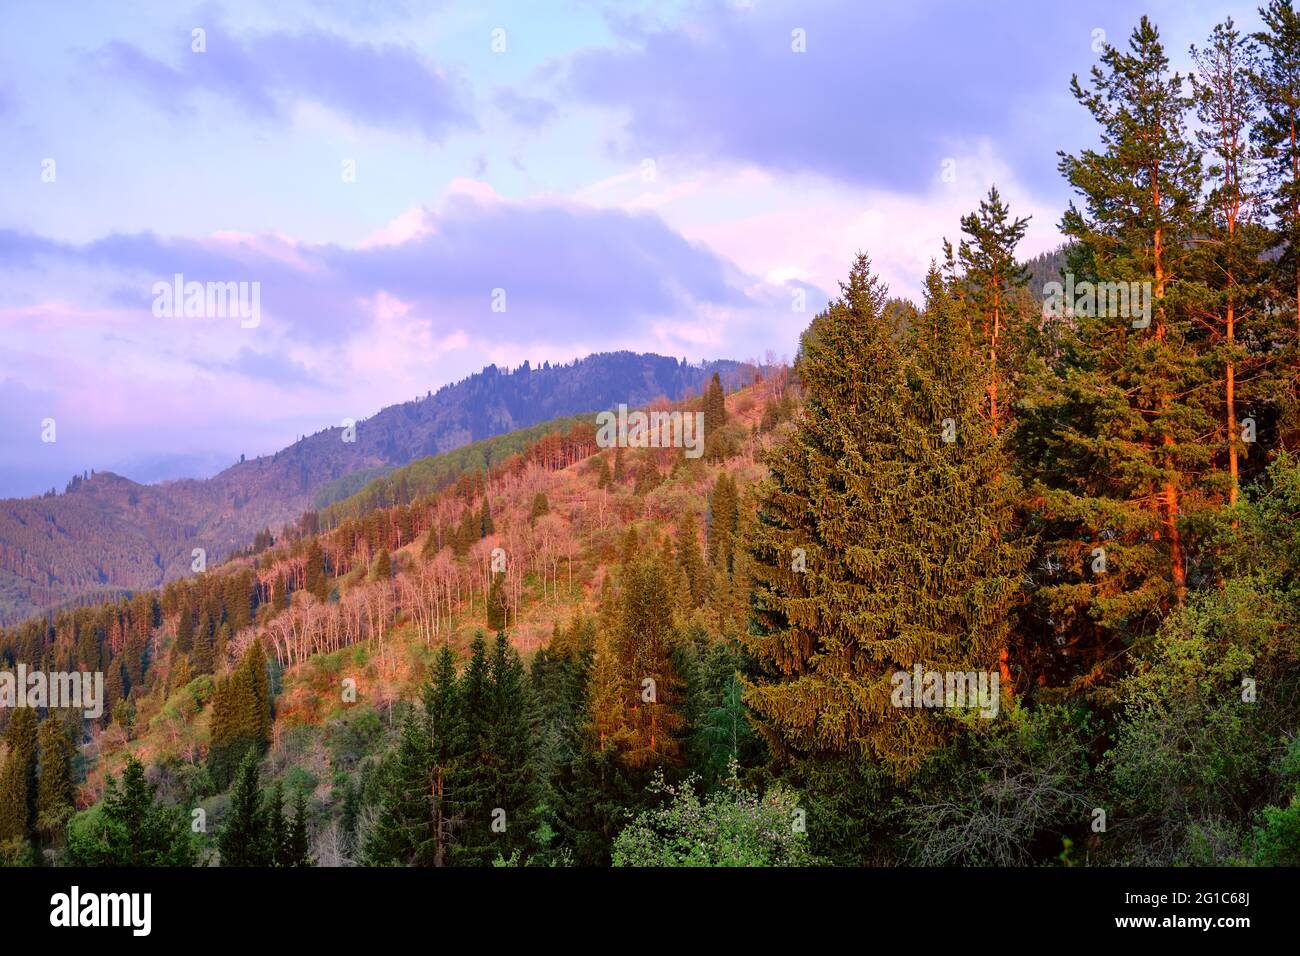 Mountain hills overgrown with coniferous and deciduous forests illuminated by the soft light of the setting sun Stock Photo